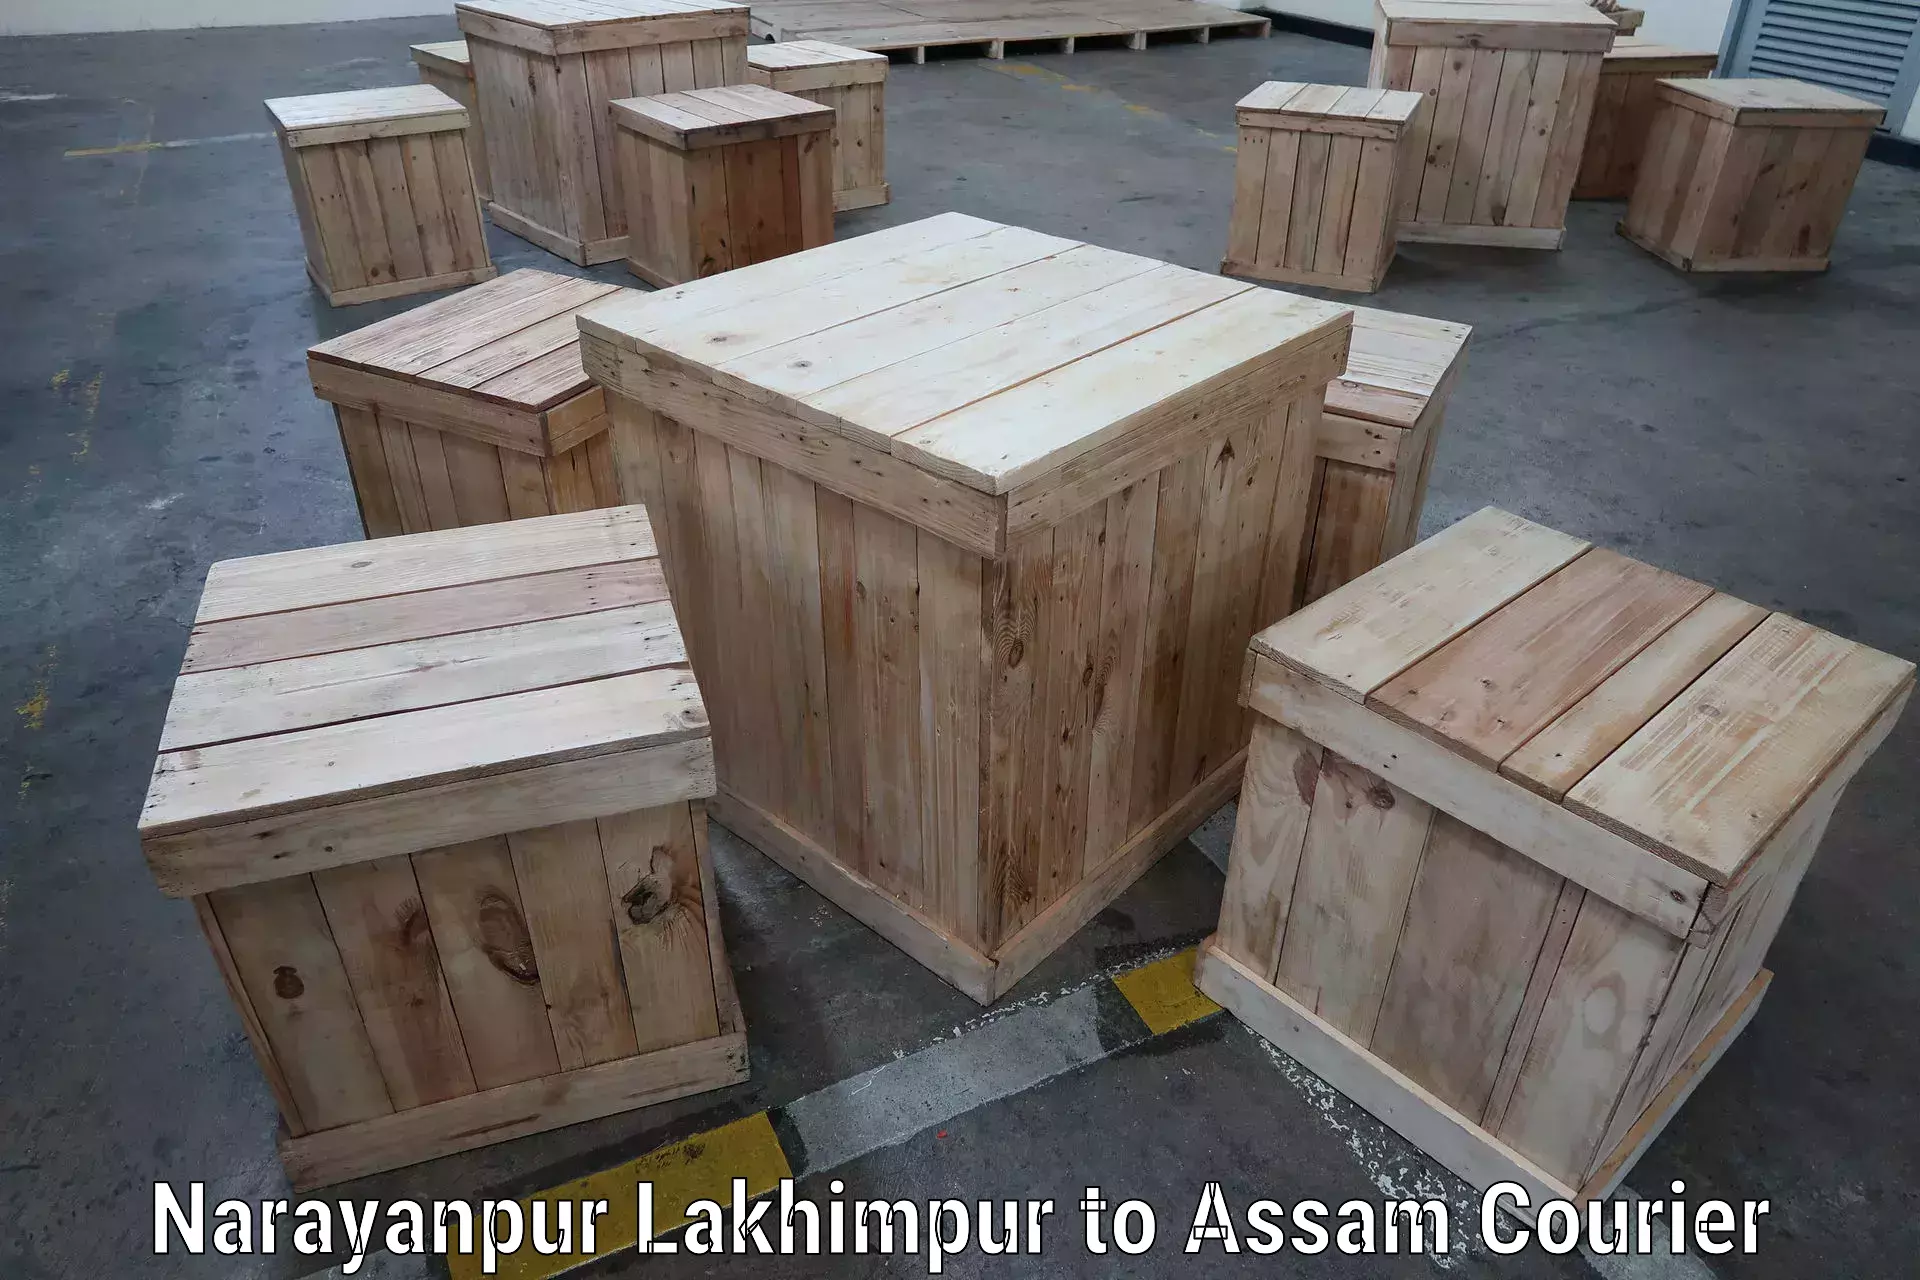 Fast-track shipping solutions Narayanpur Lakhimpur to Biswanath